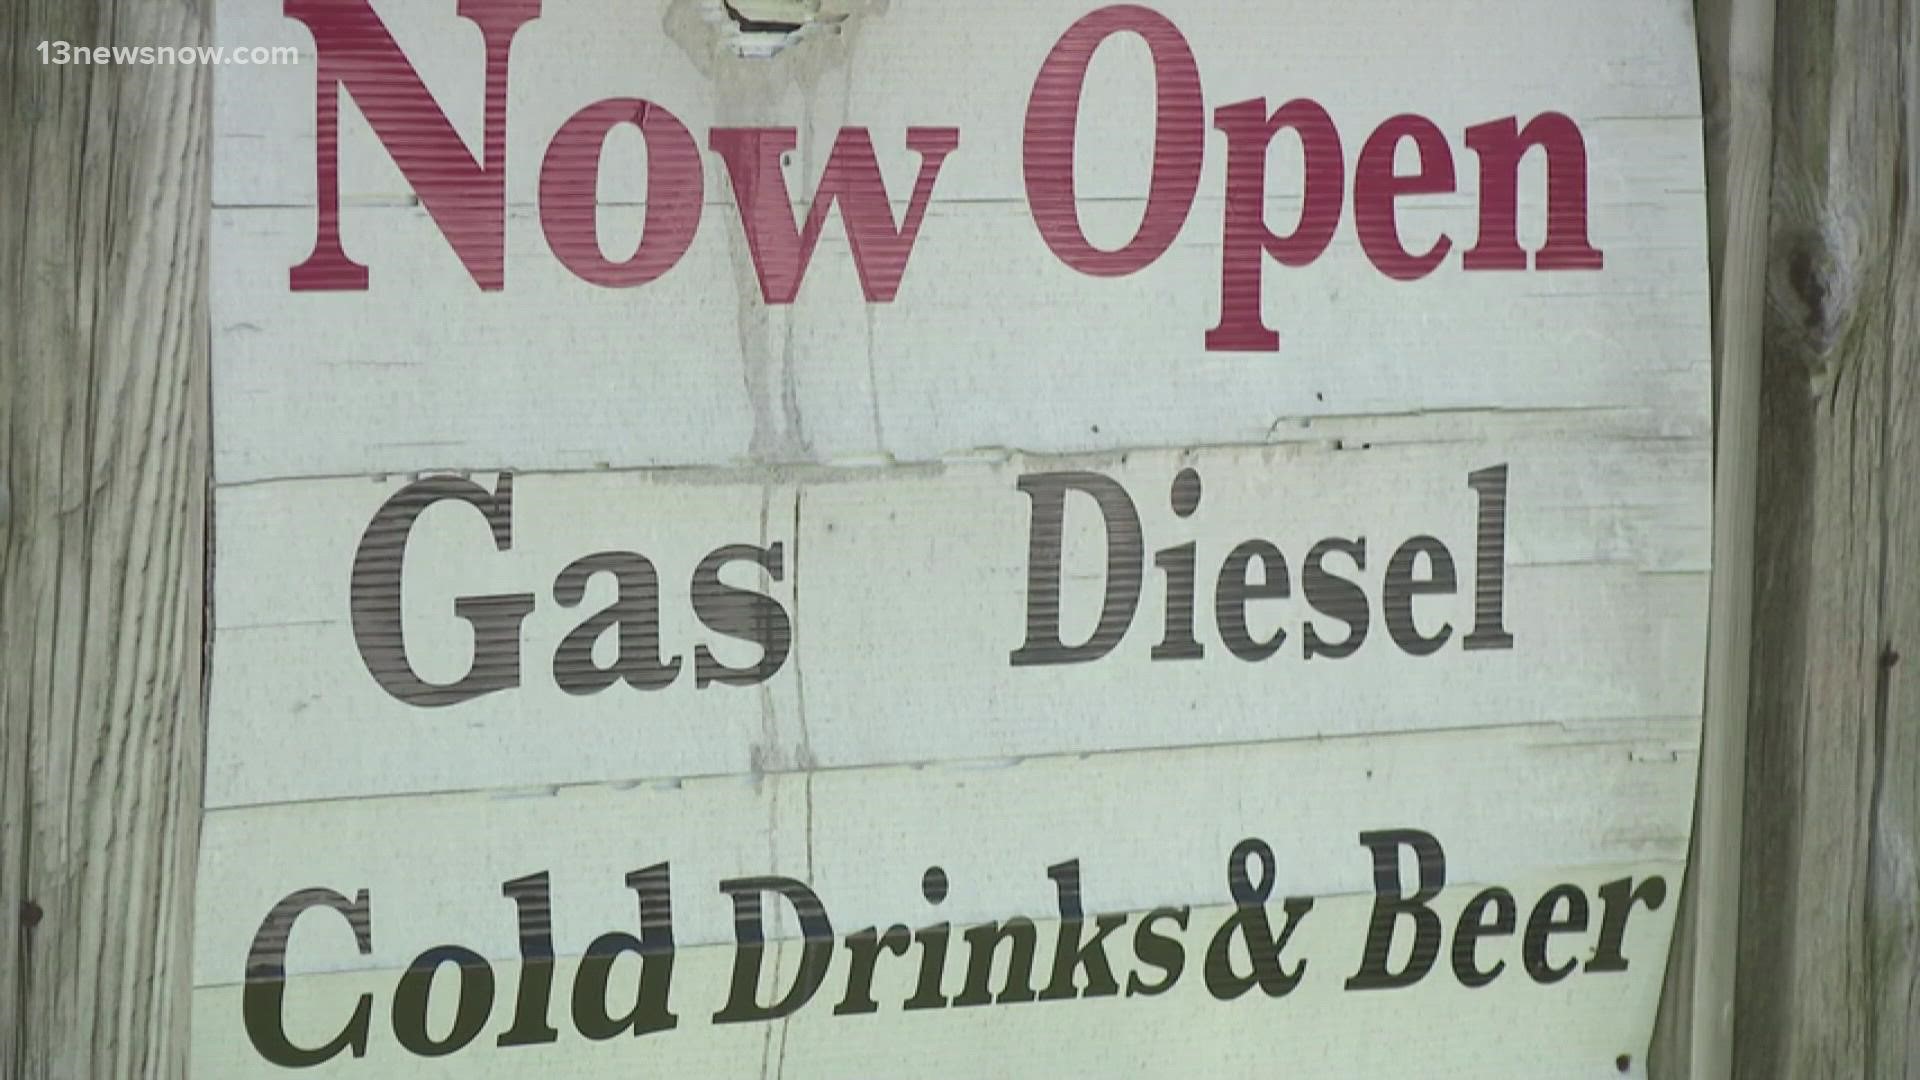 Drivers say a fuel delivery driver somehow swapped diesel fuel with unleaded gasoline at two gas stations in Virginia Beach.